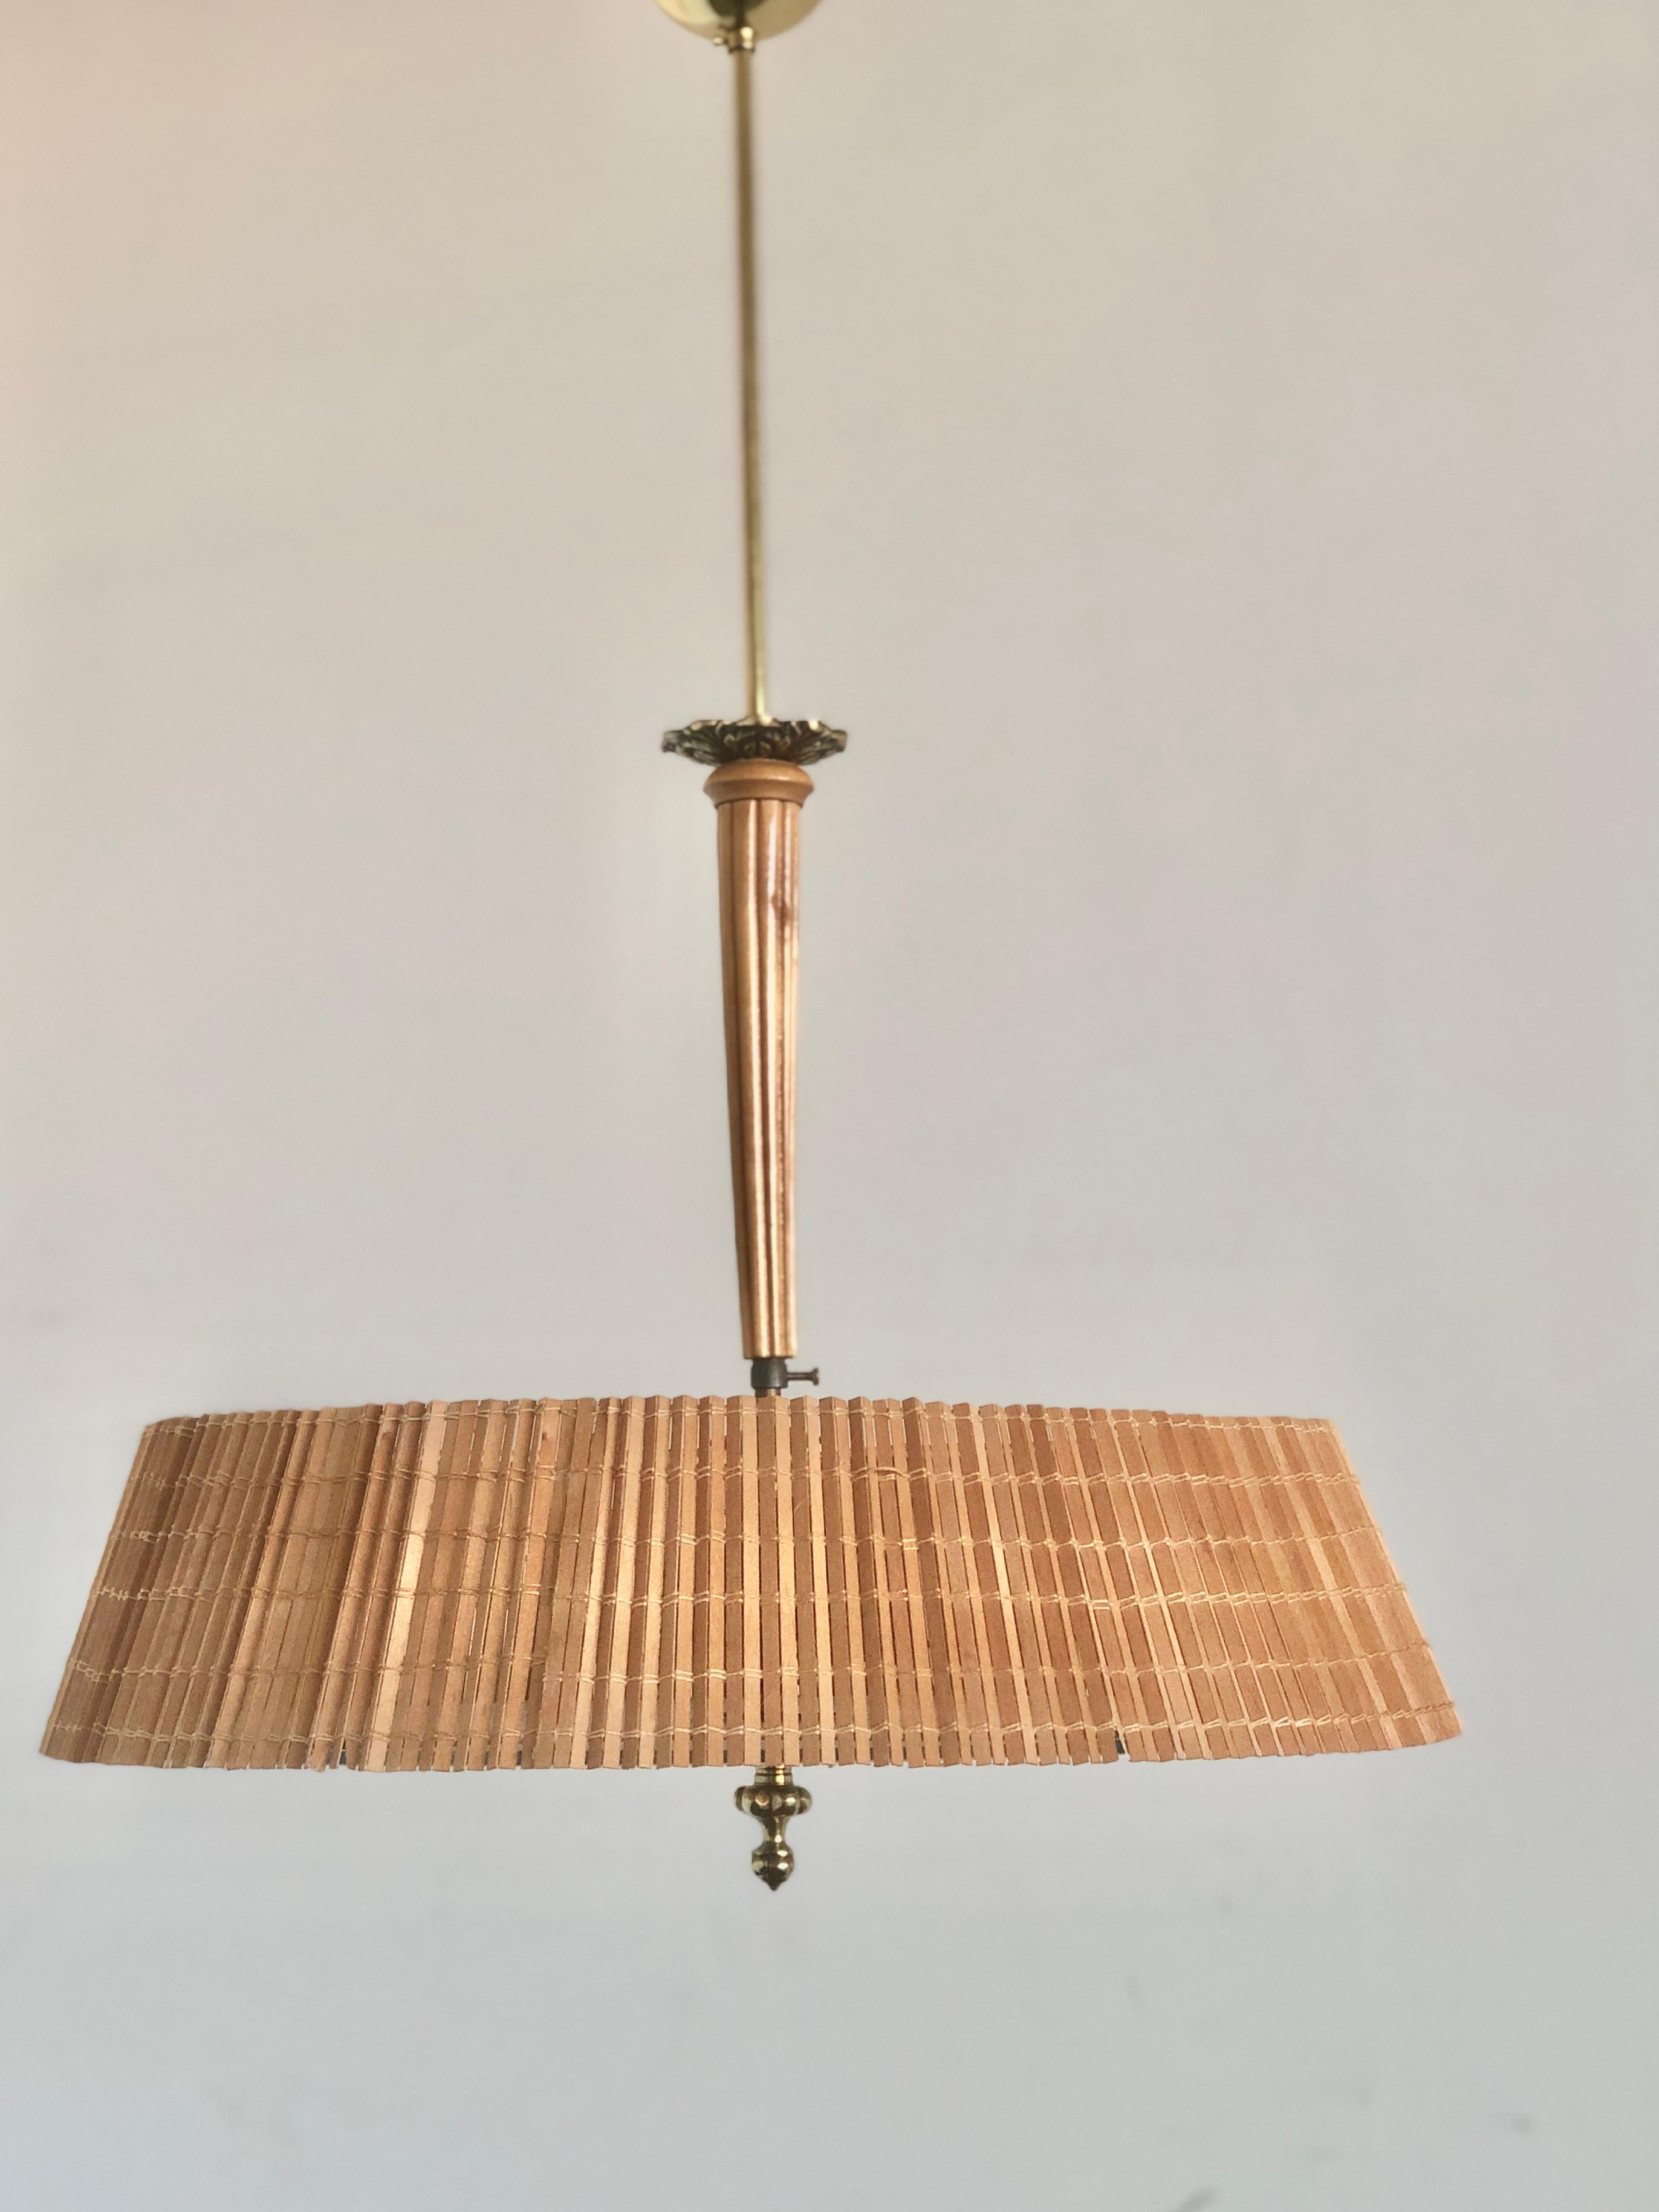 Scandinavian Modern Pendant by Paavo Tynell with Diffuser Pained by Kyllikki Salmenhaara For Sale